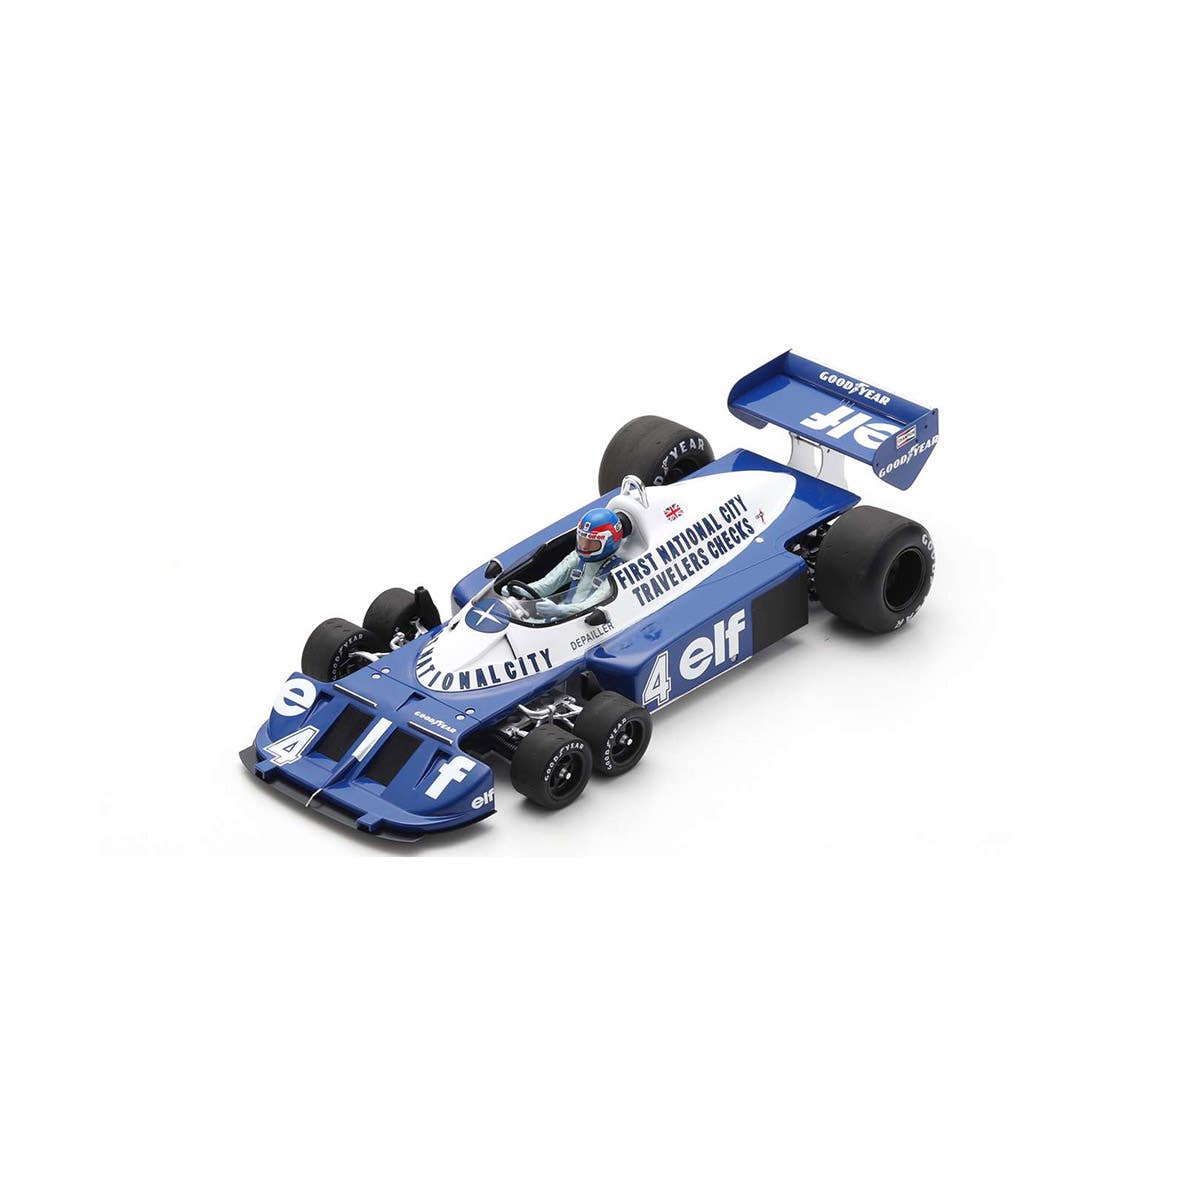 Tyrrell P34 No.4 2nd Canadian GP 1977 - Patrick Depailler - 1:18 Scale Resin Model Car